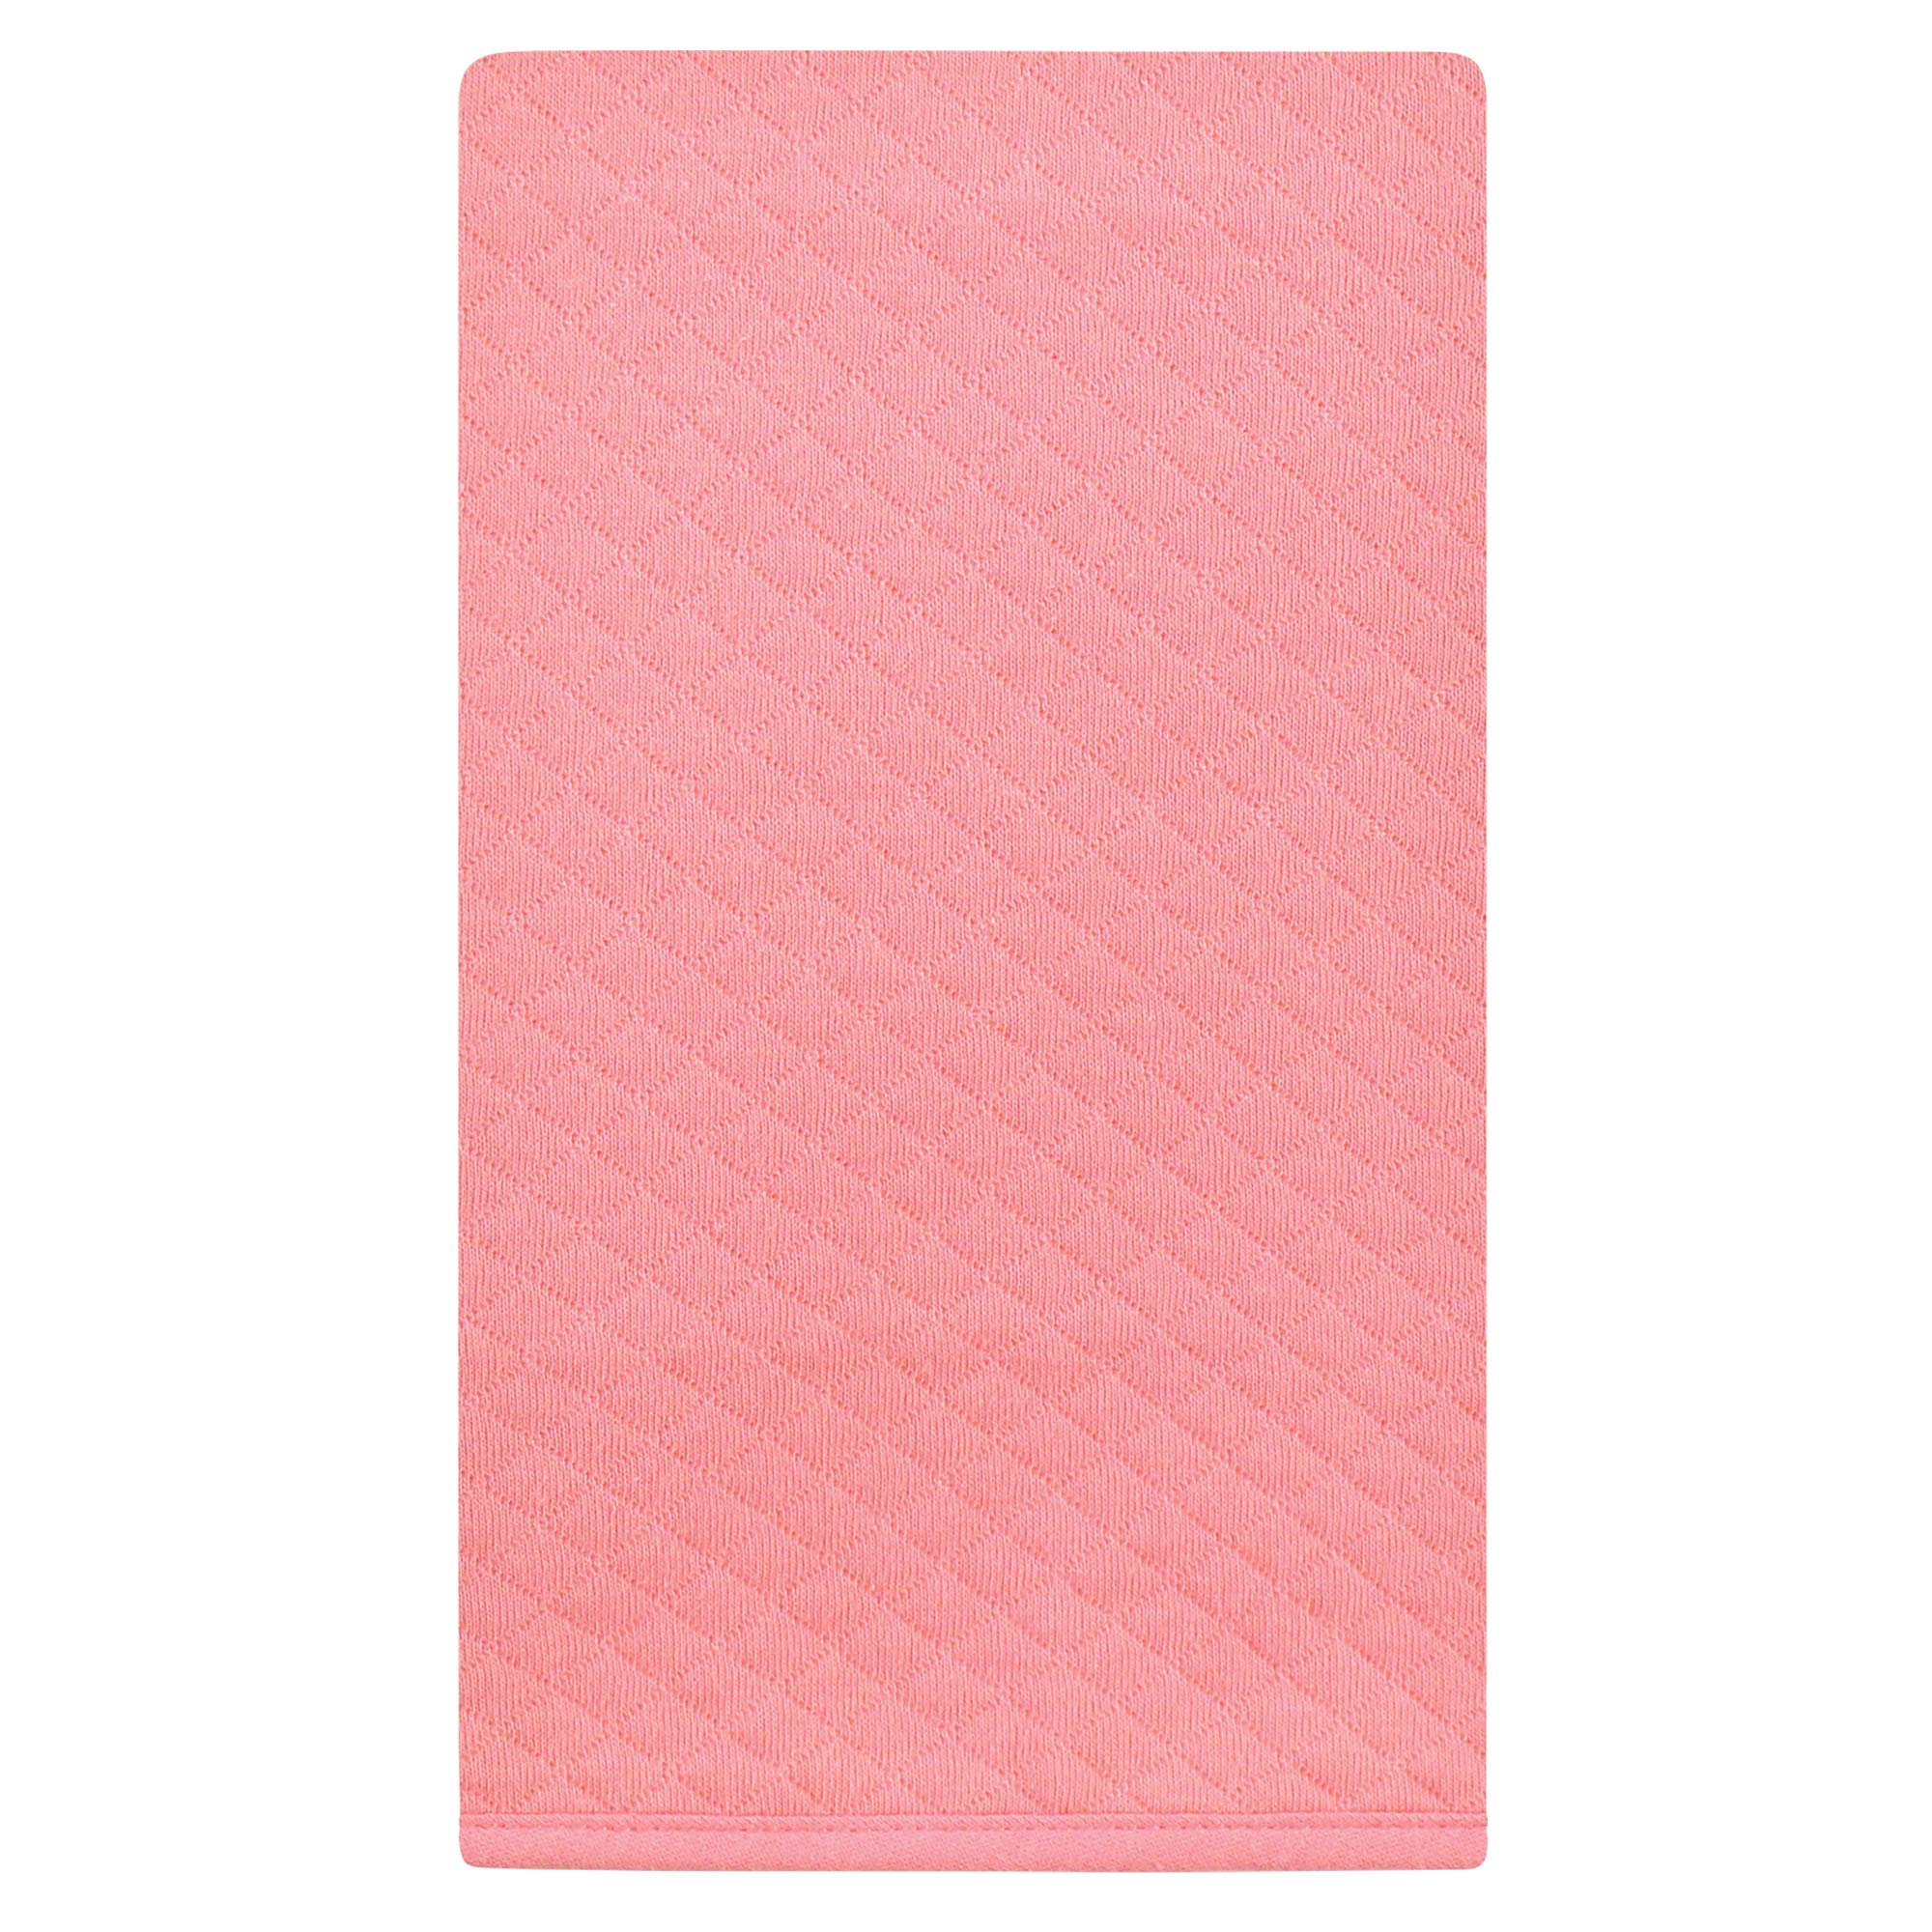 Hudson Baby Unisex Baby Quilted Burp Cloths